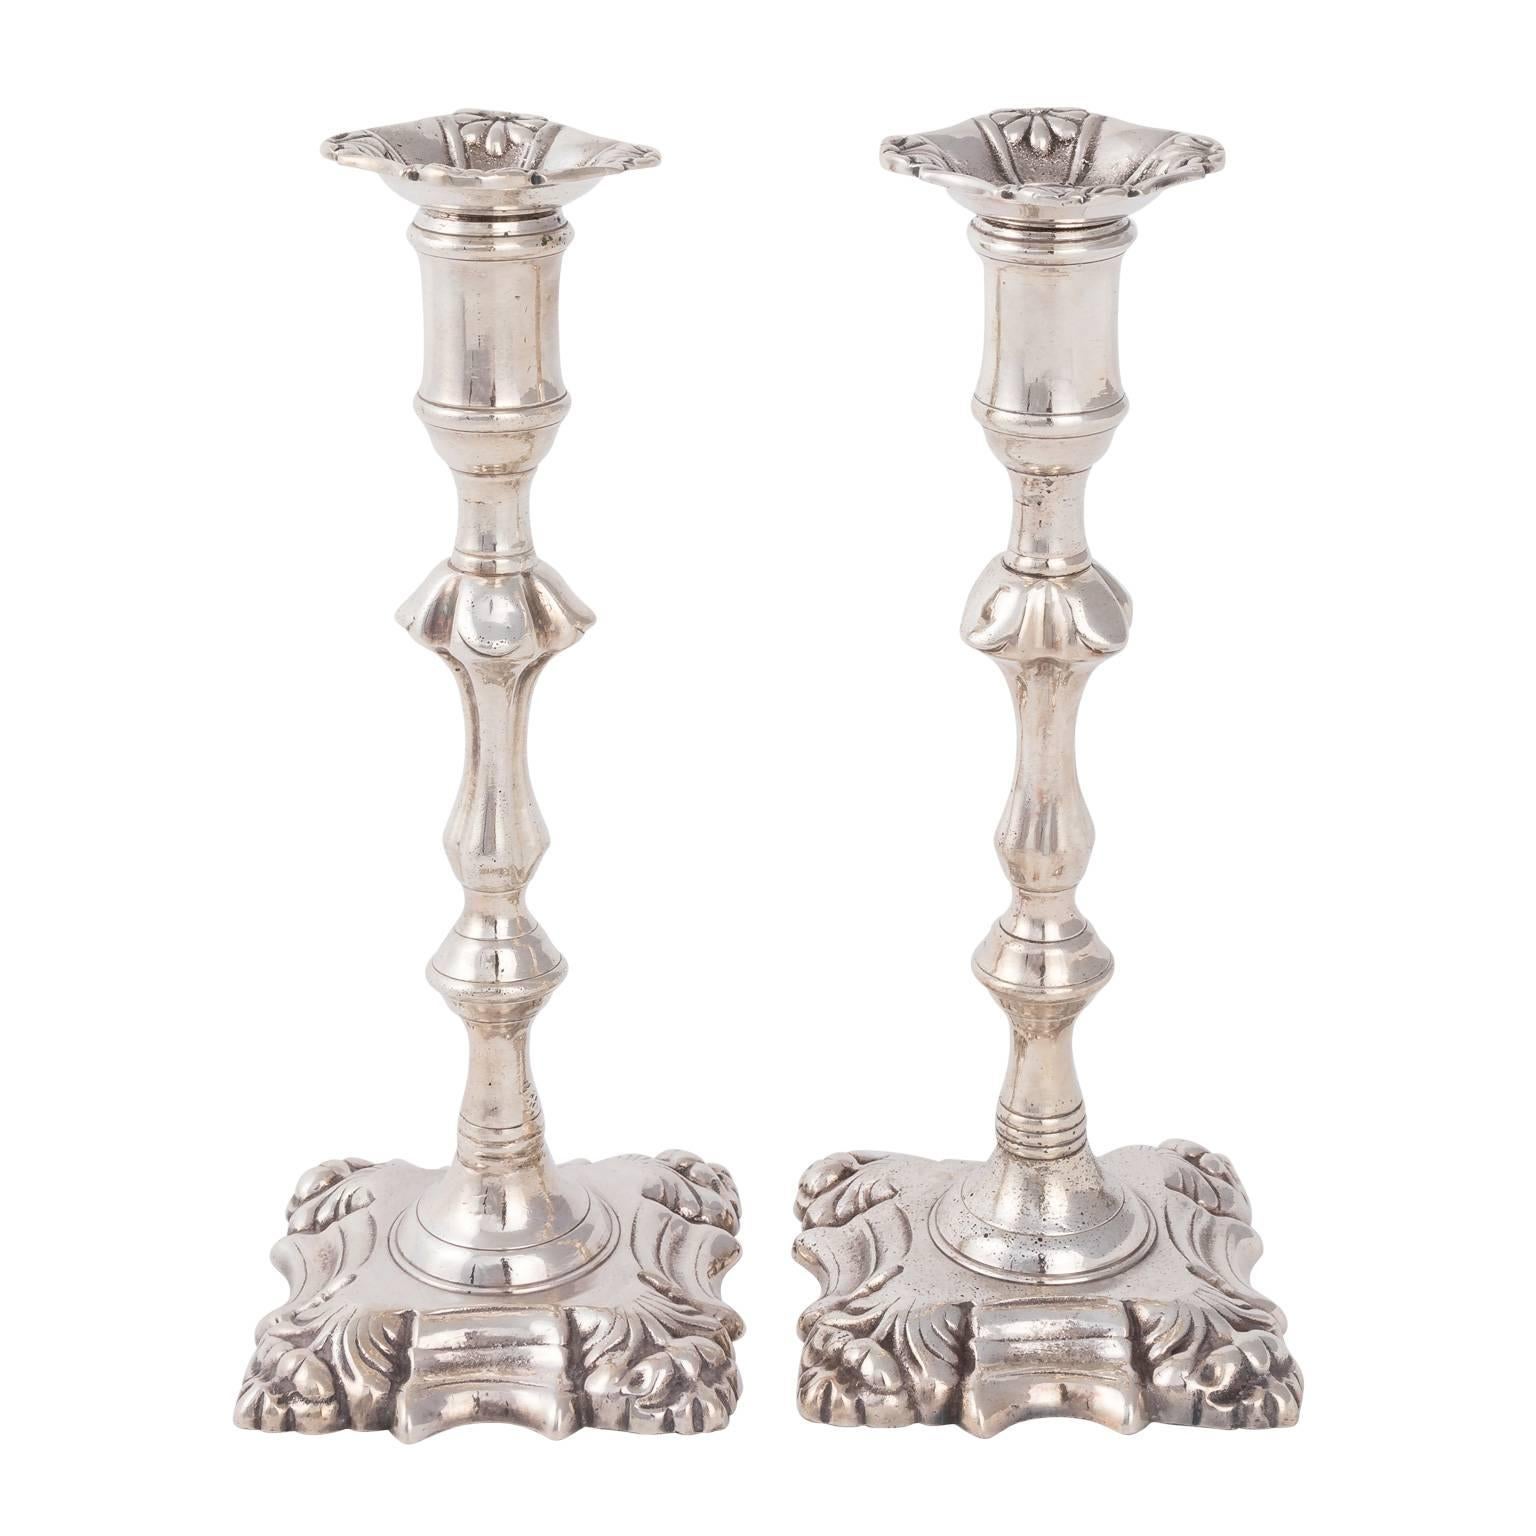 Pair of English Silver Plated Candlesticks